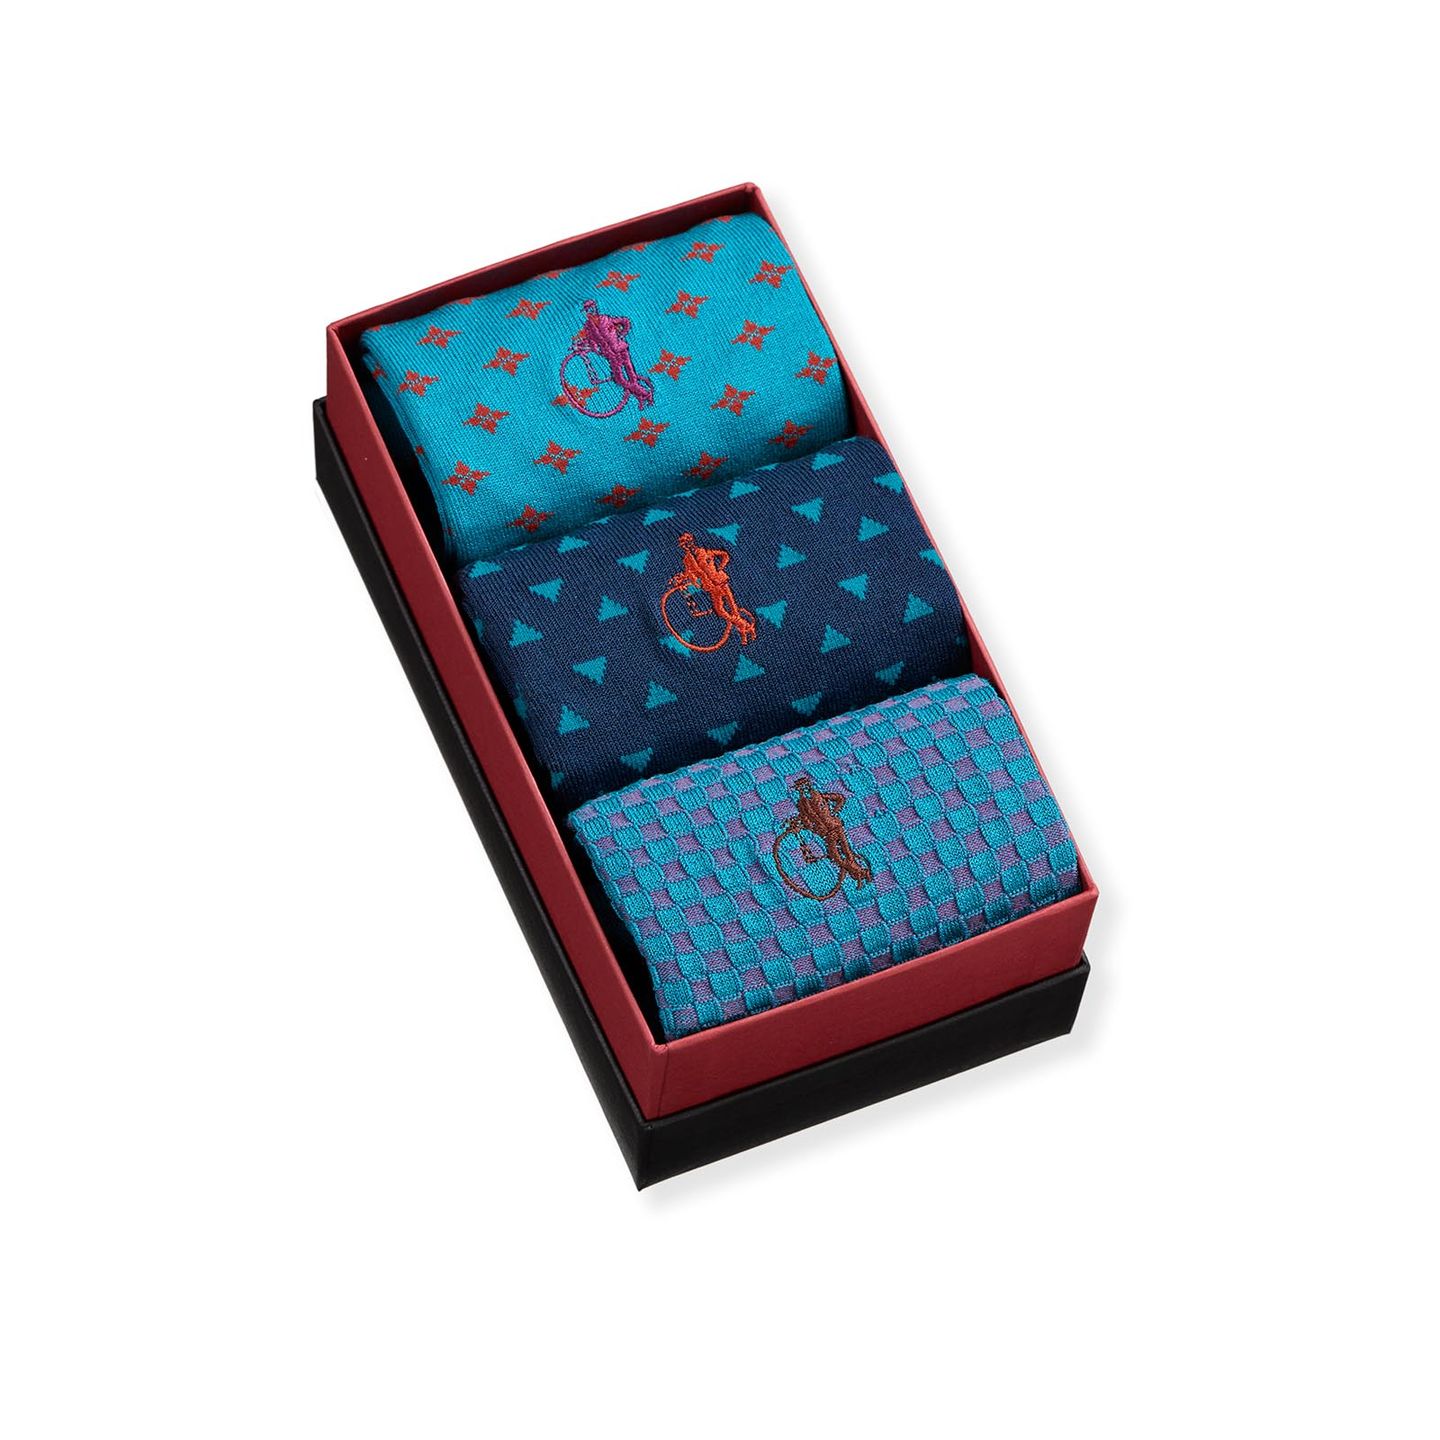 3 pair of blue patterned socks in a box